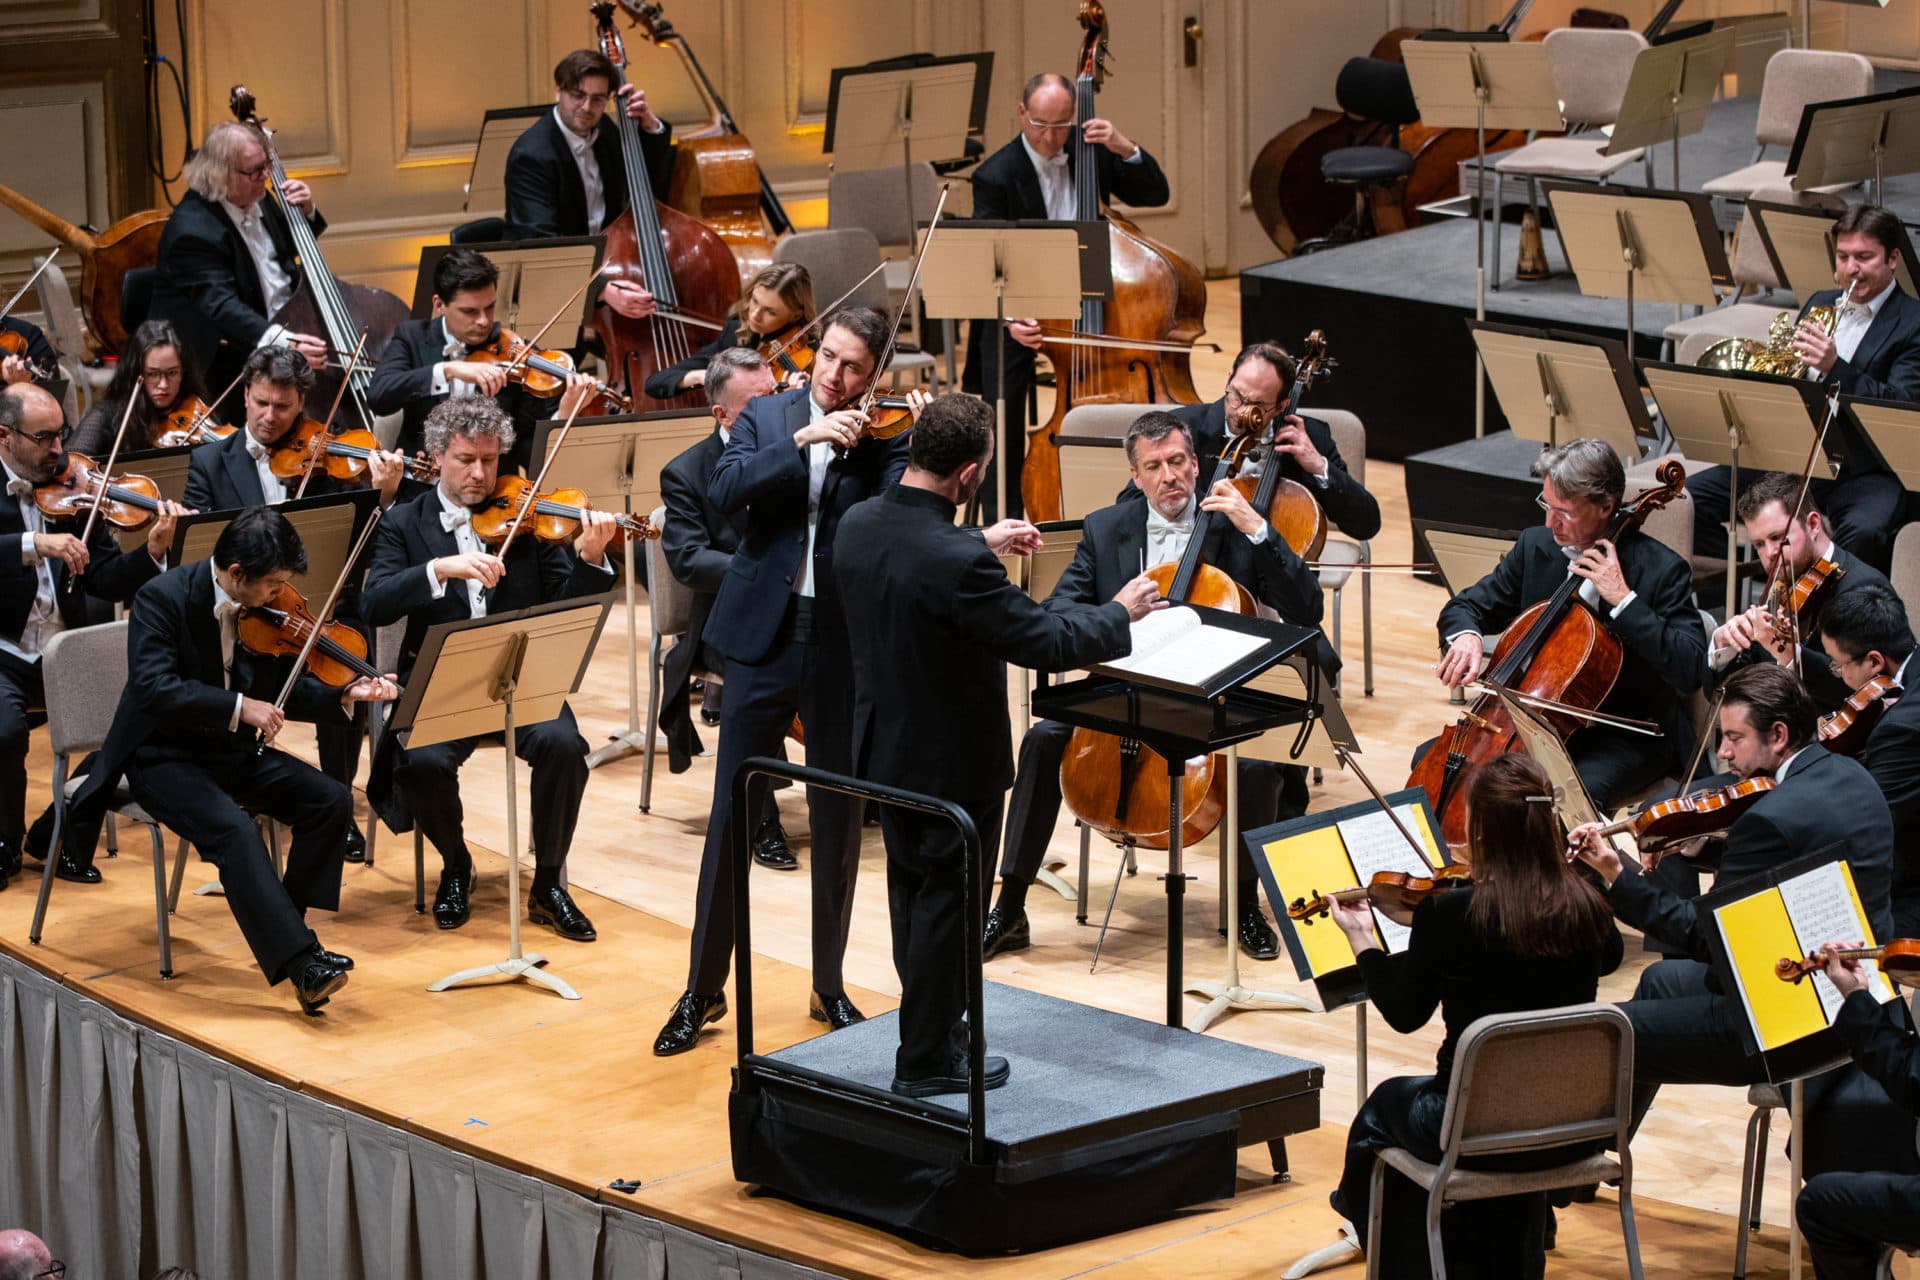 Violinist Noah Bendix-Balgley with the Berlin Philharmonic at Symphony Hall. (Courtesy Robert Torres)